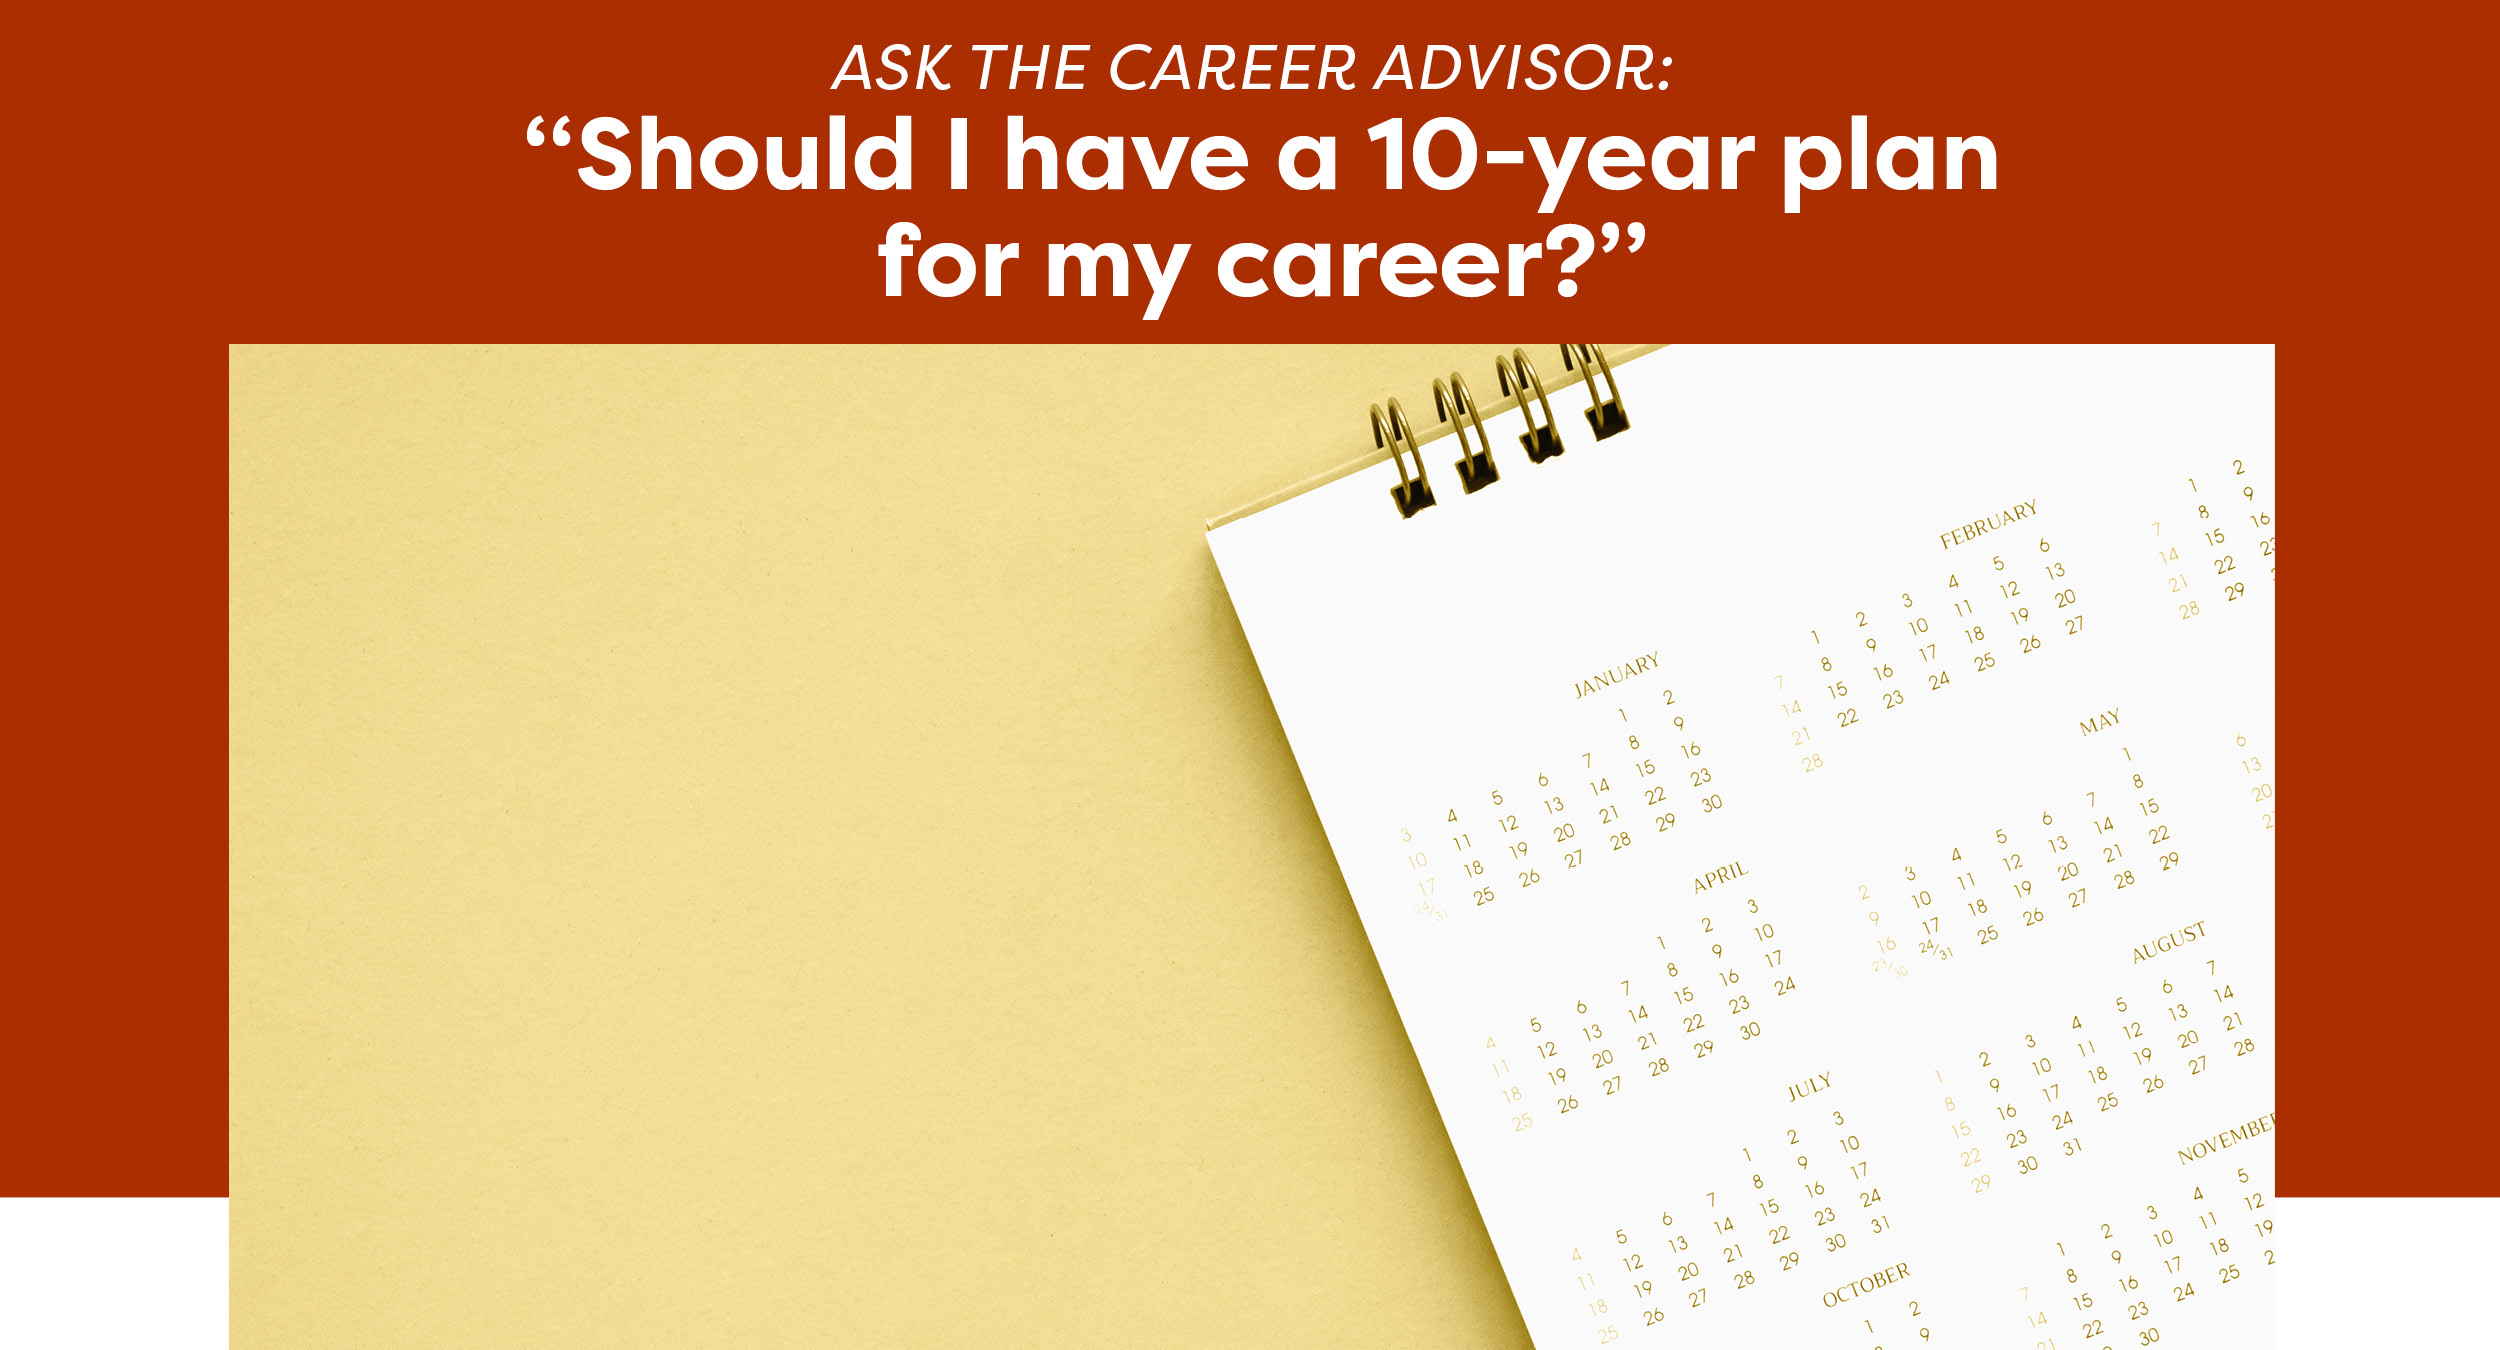 Ask the career advisor: “Should I have a 10-year plan for my career?”